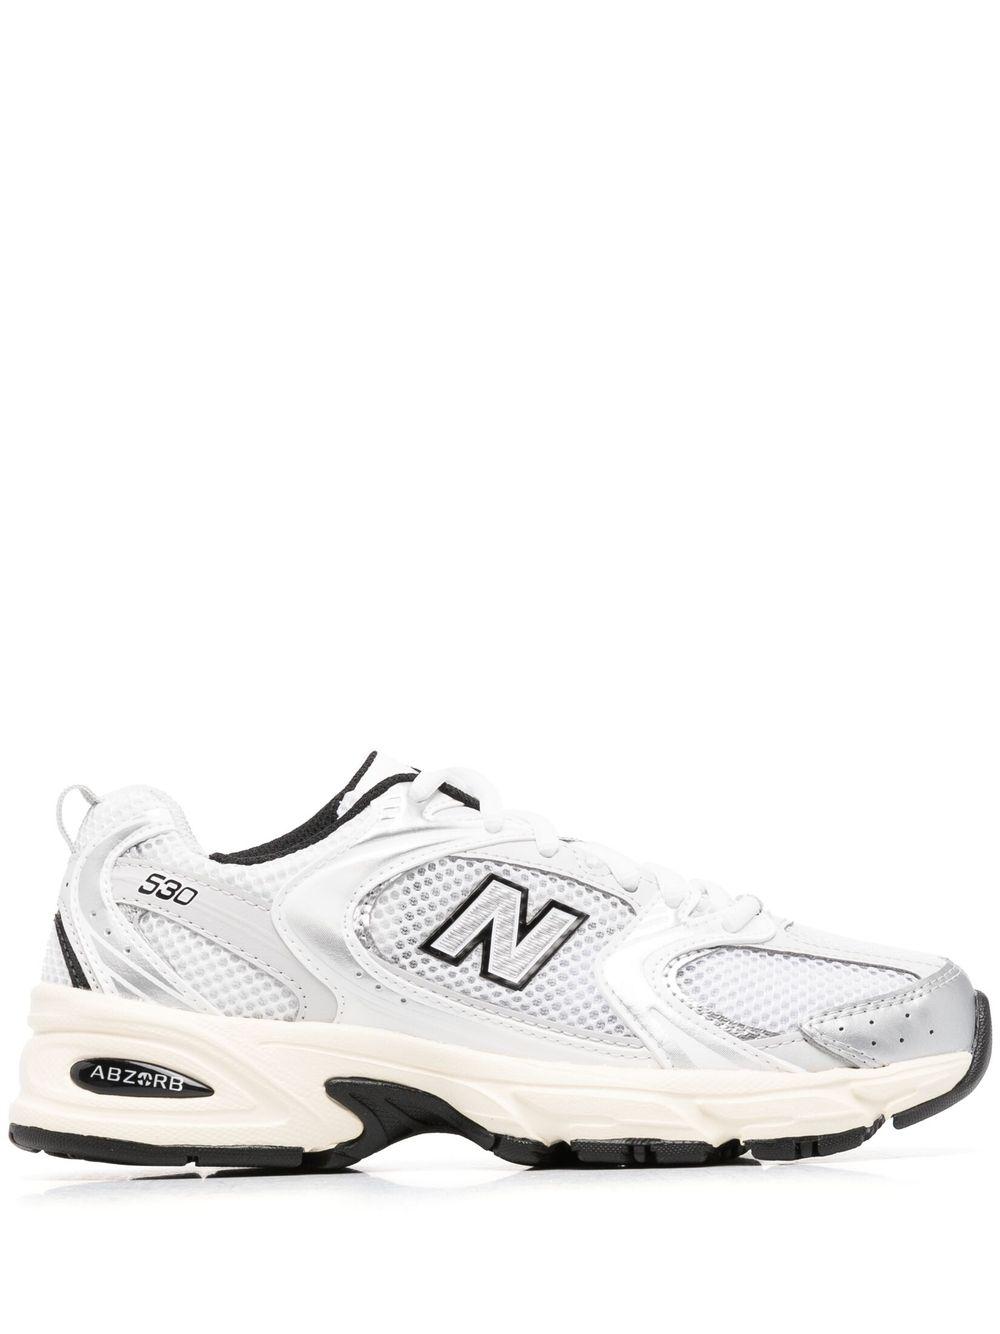 New Balance Mr530 Sneakers in White | Lyst